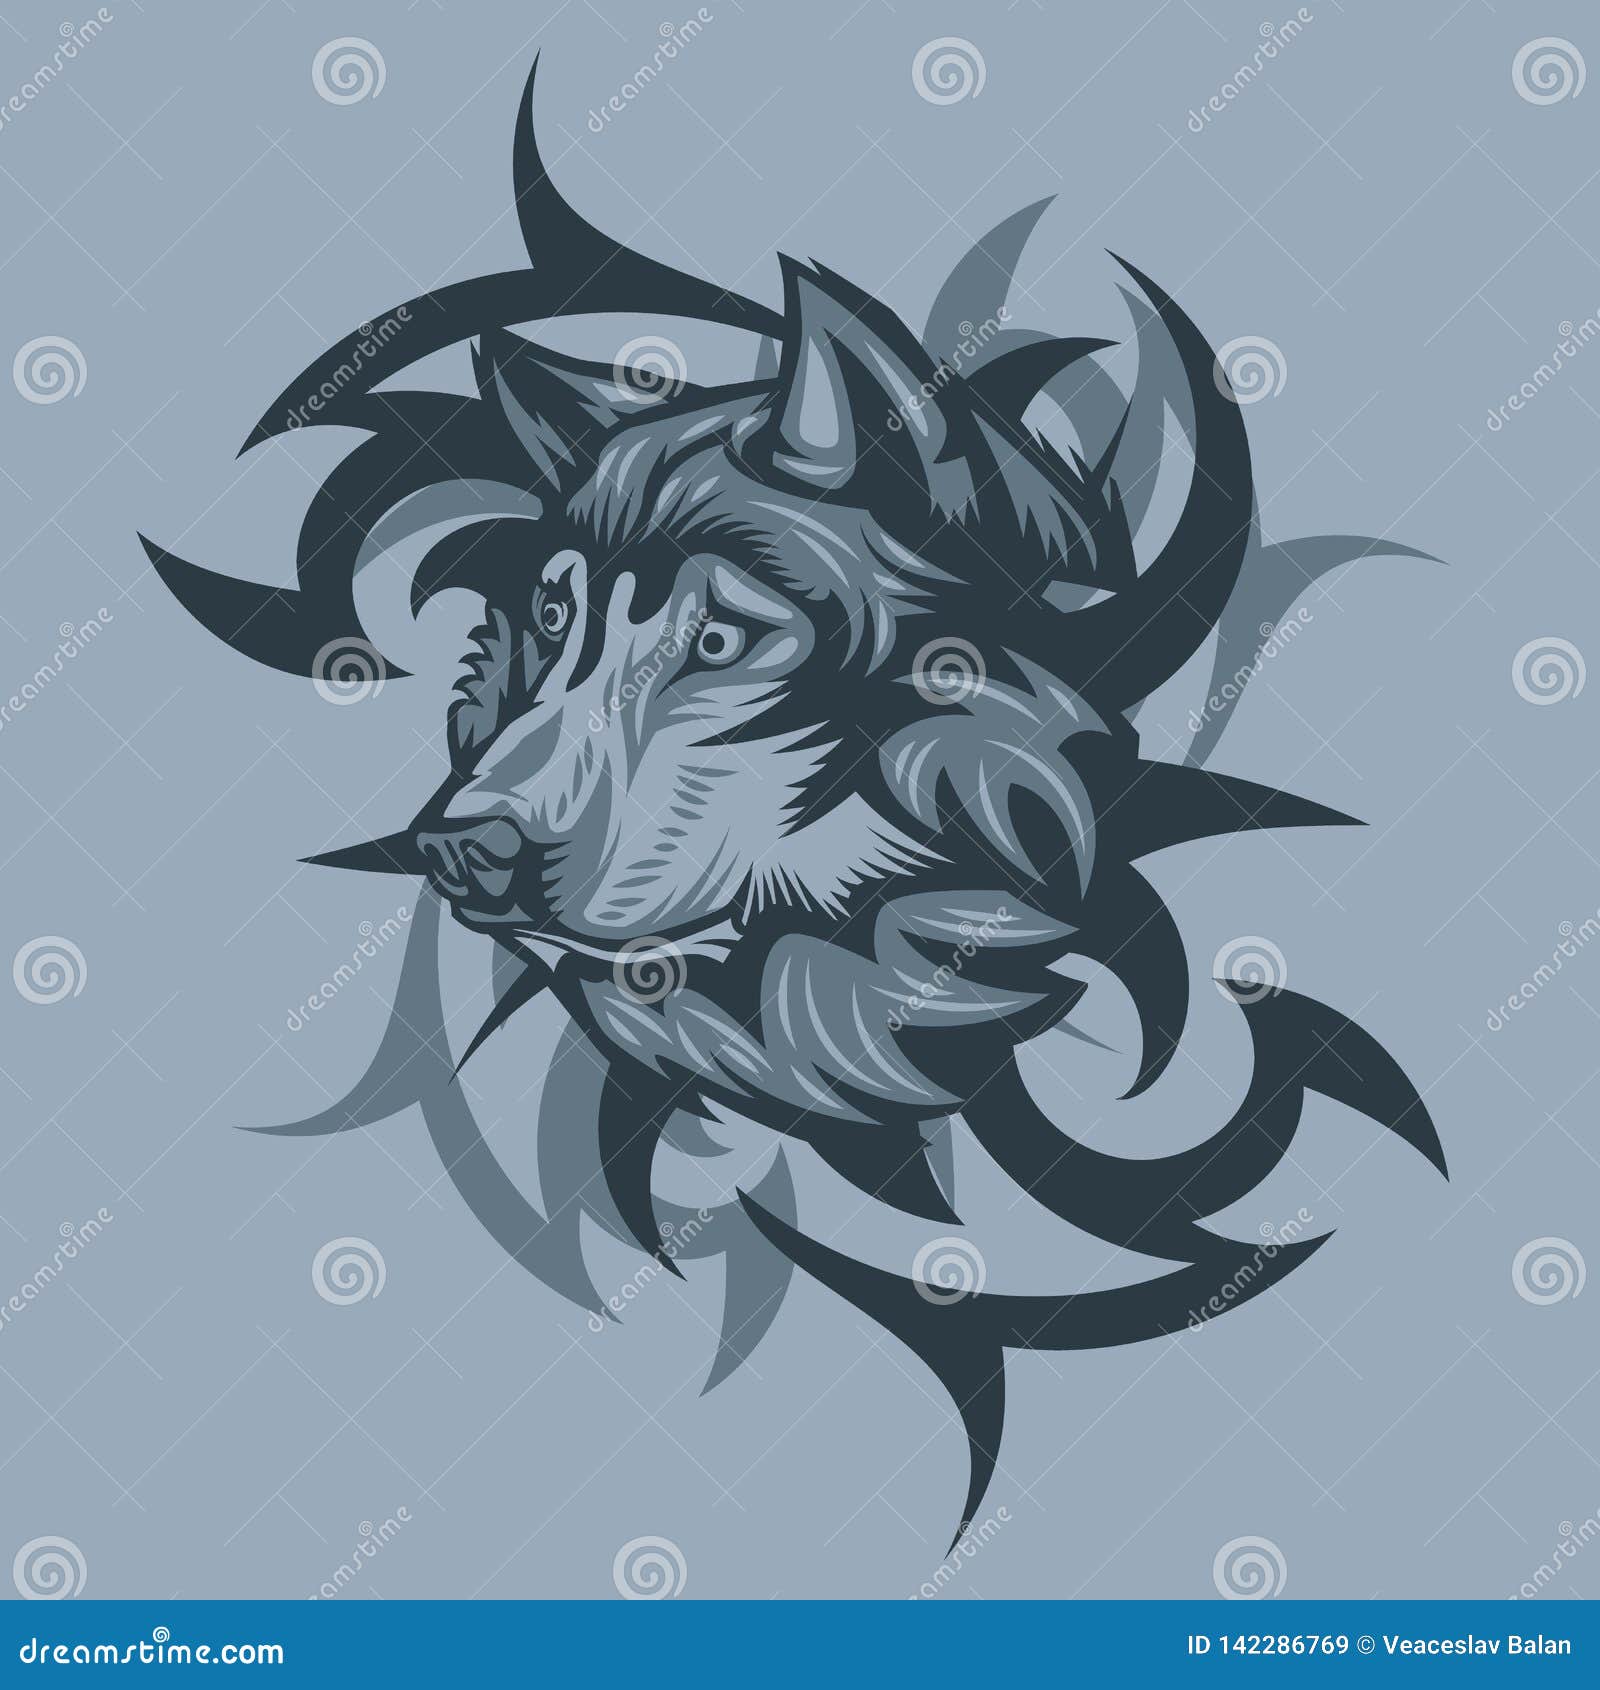 Blue Wolf Tribal COMMISSION by Canyx on DeviantArt